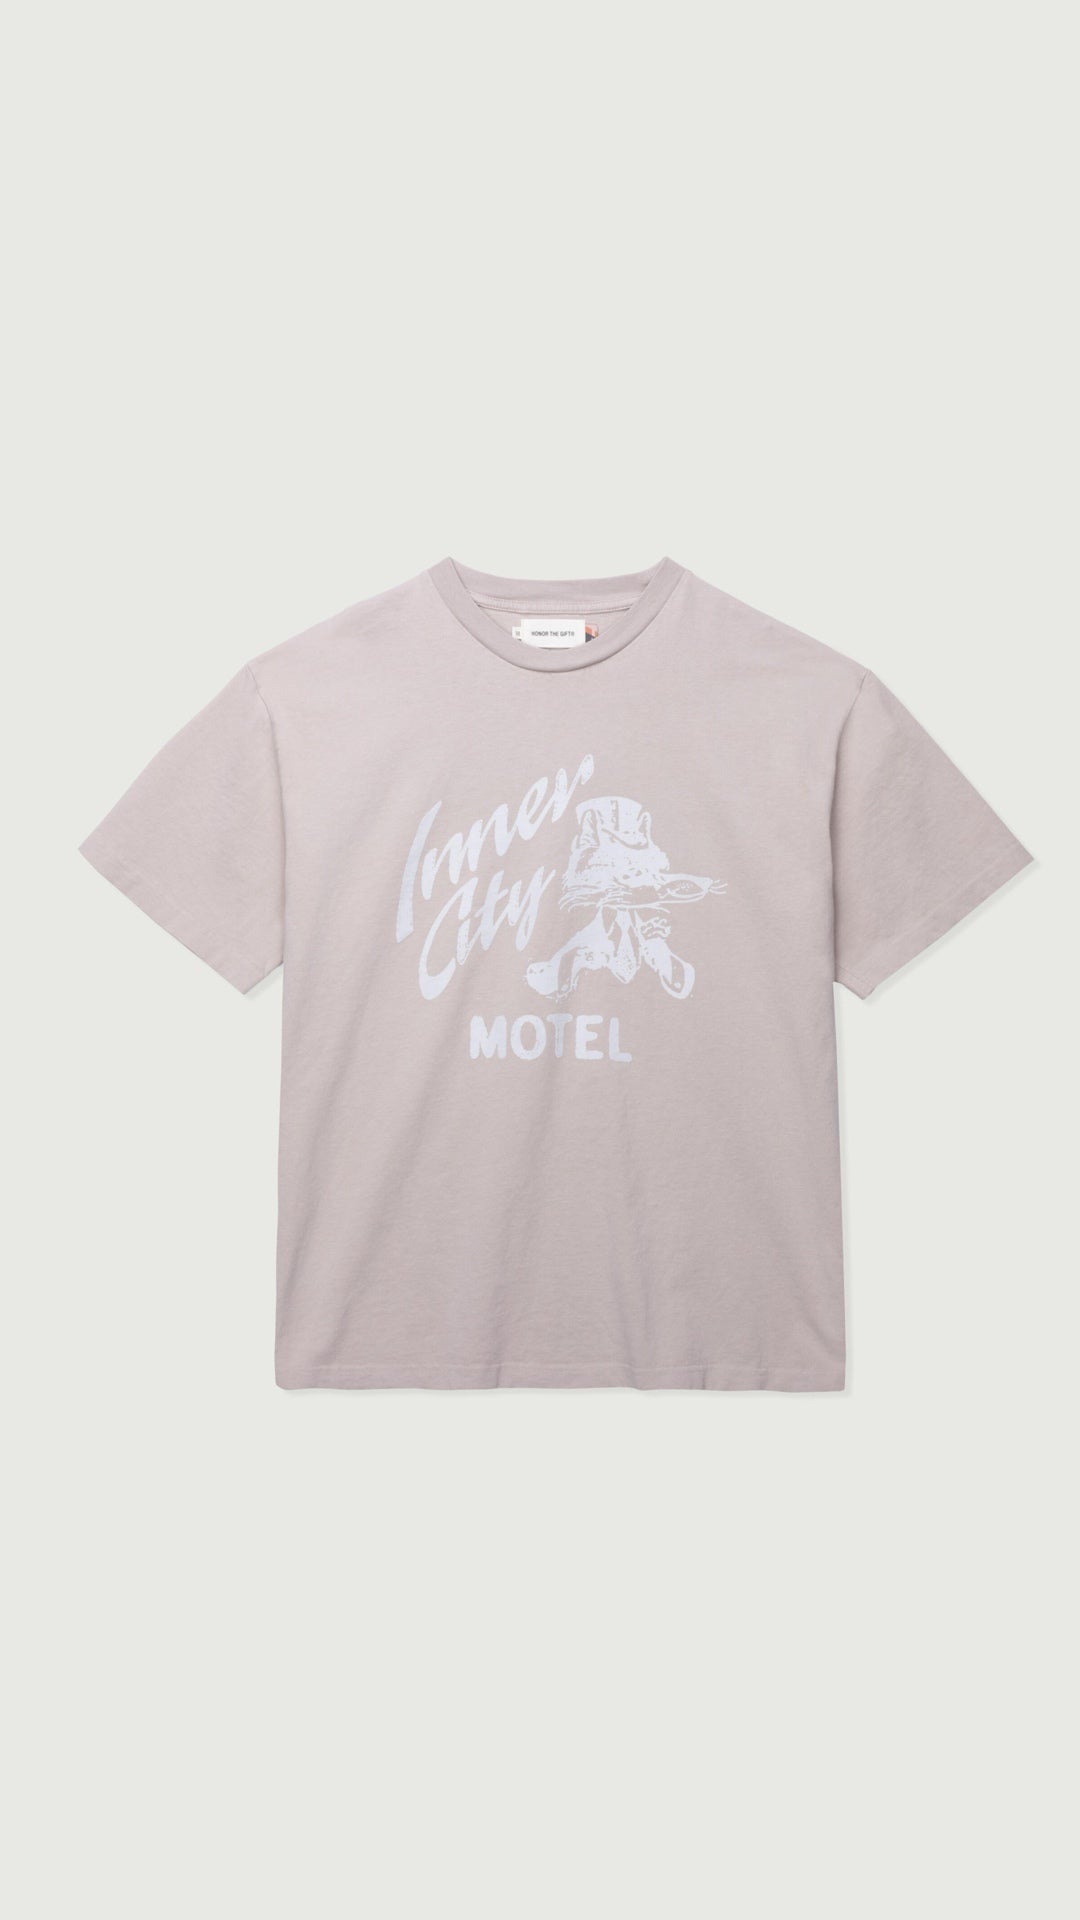 BROWN D-HOLIDAY INNER CITY MOTEL SS T-SHIRT